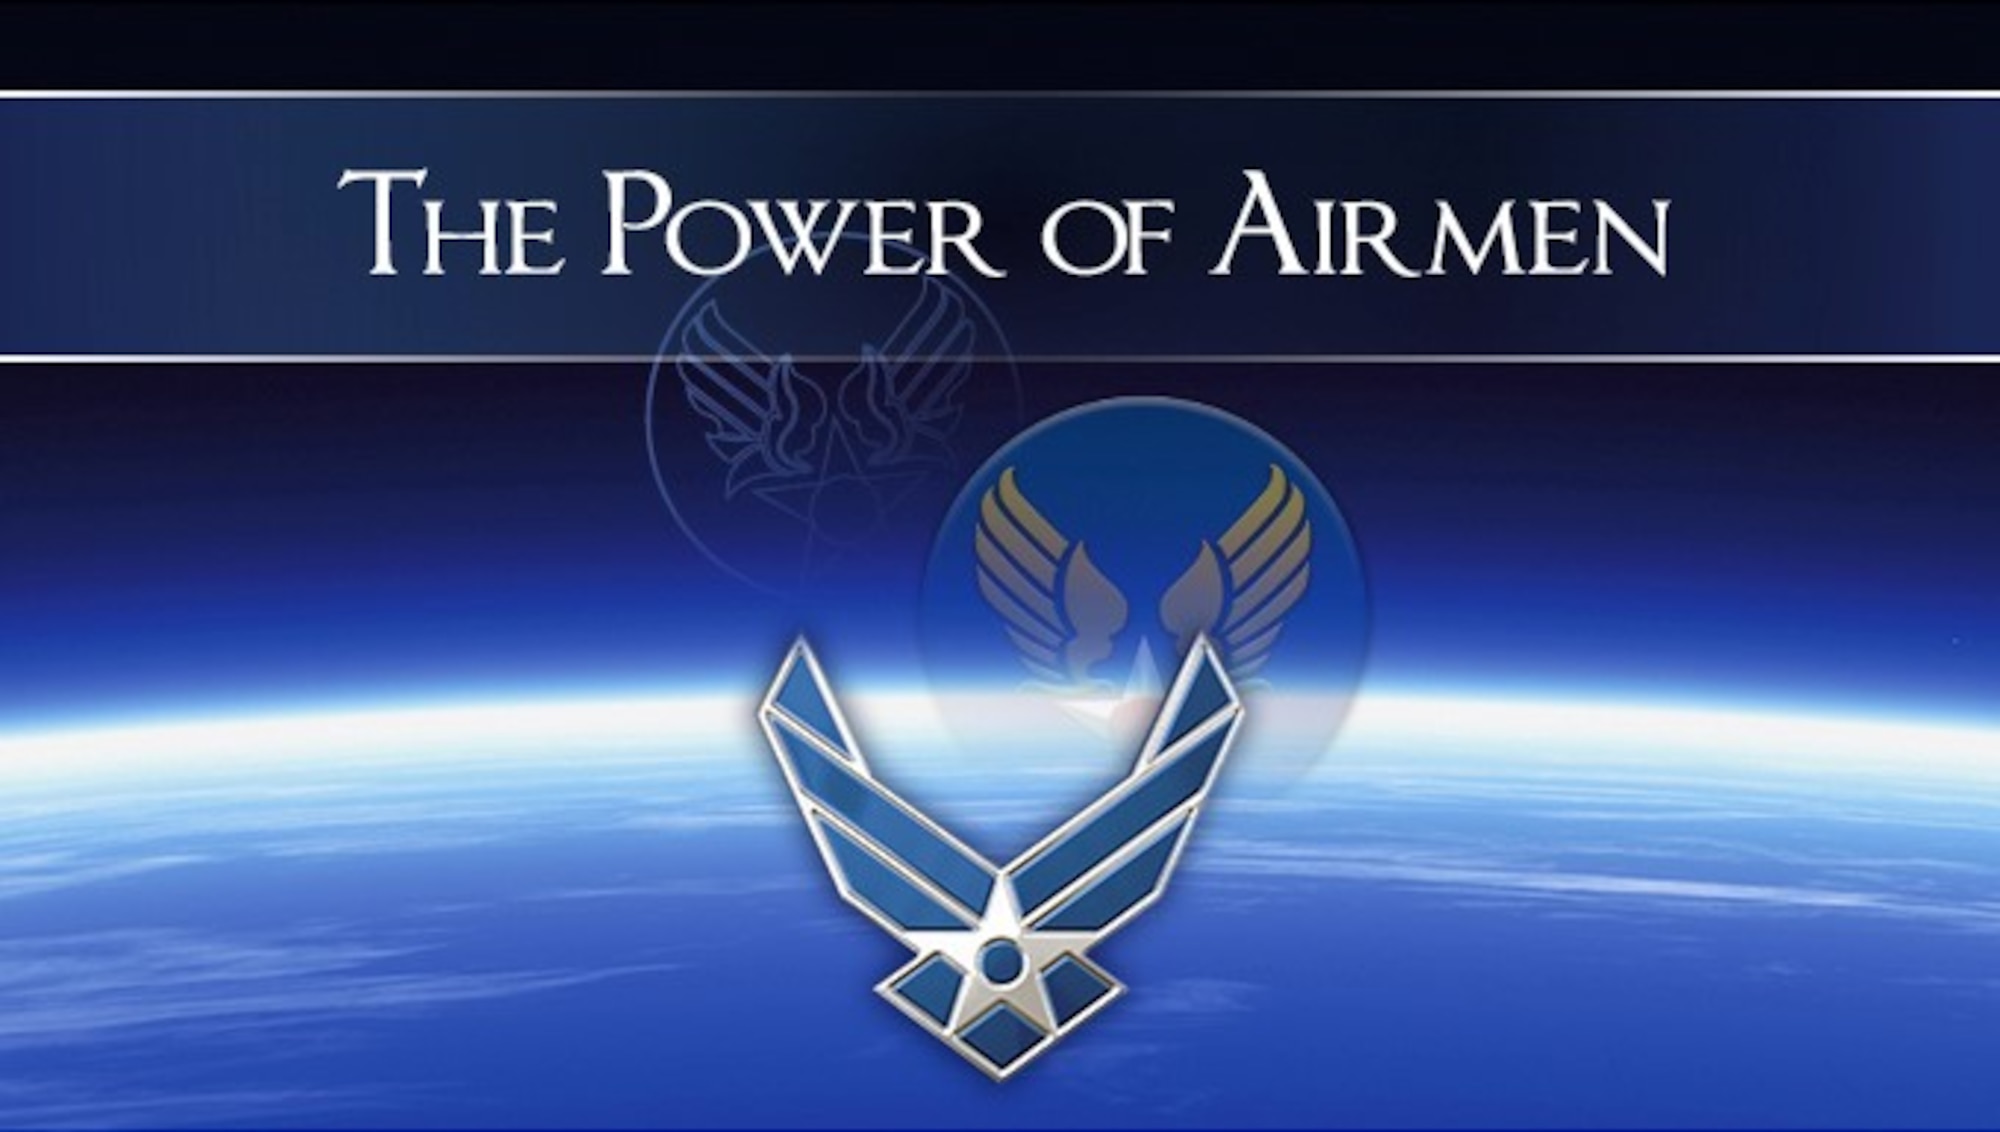 The Power of Airmen